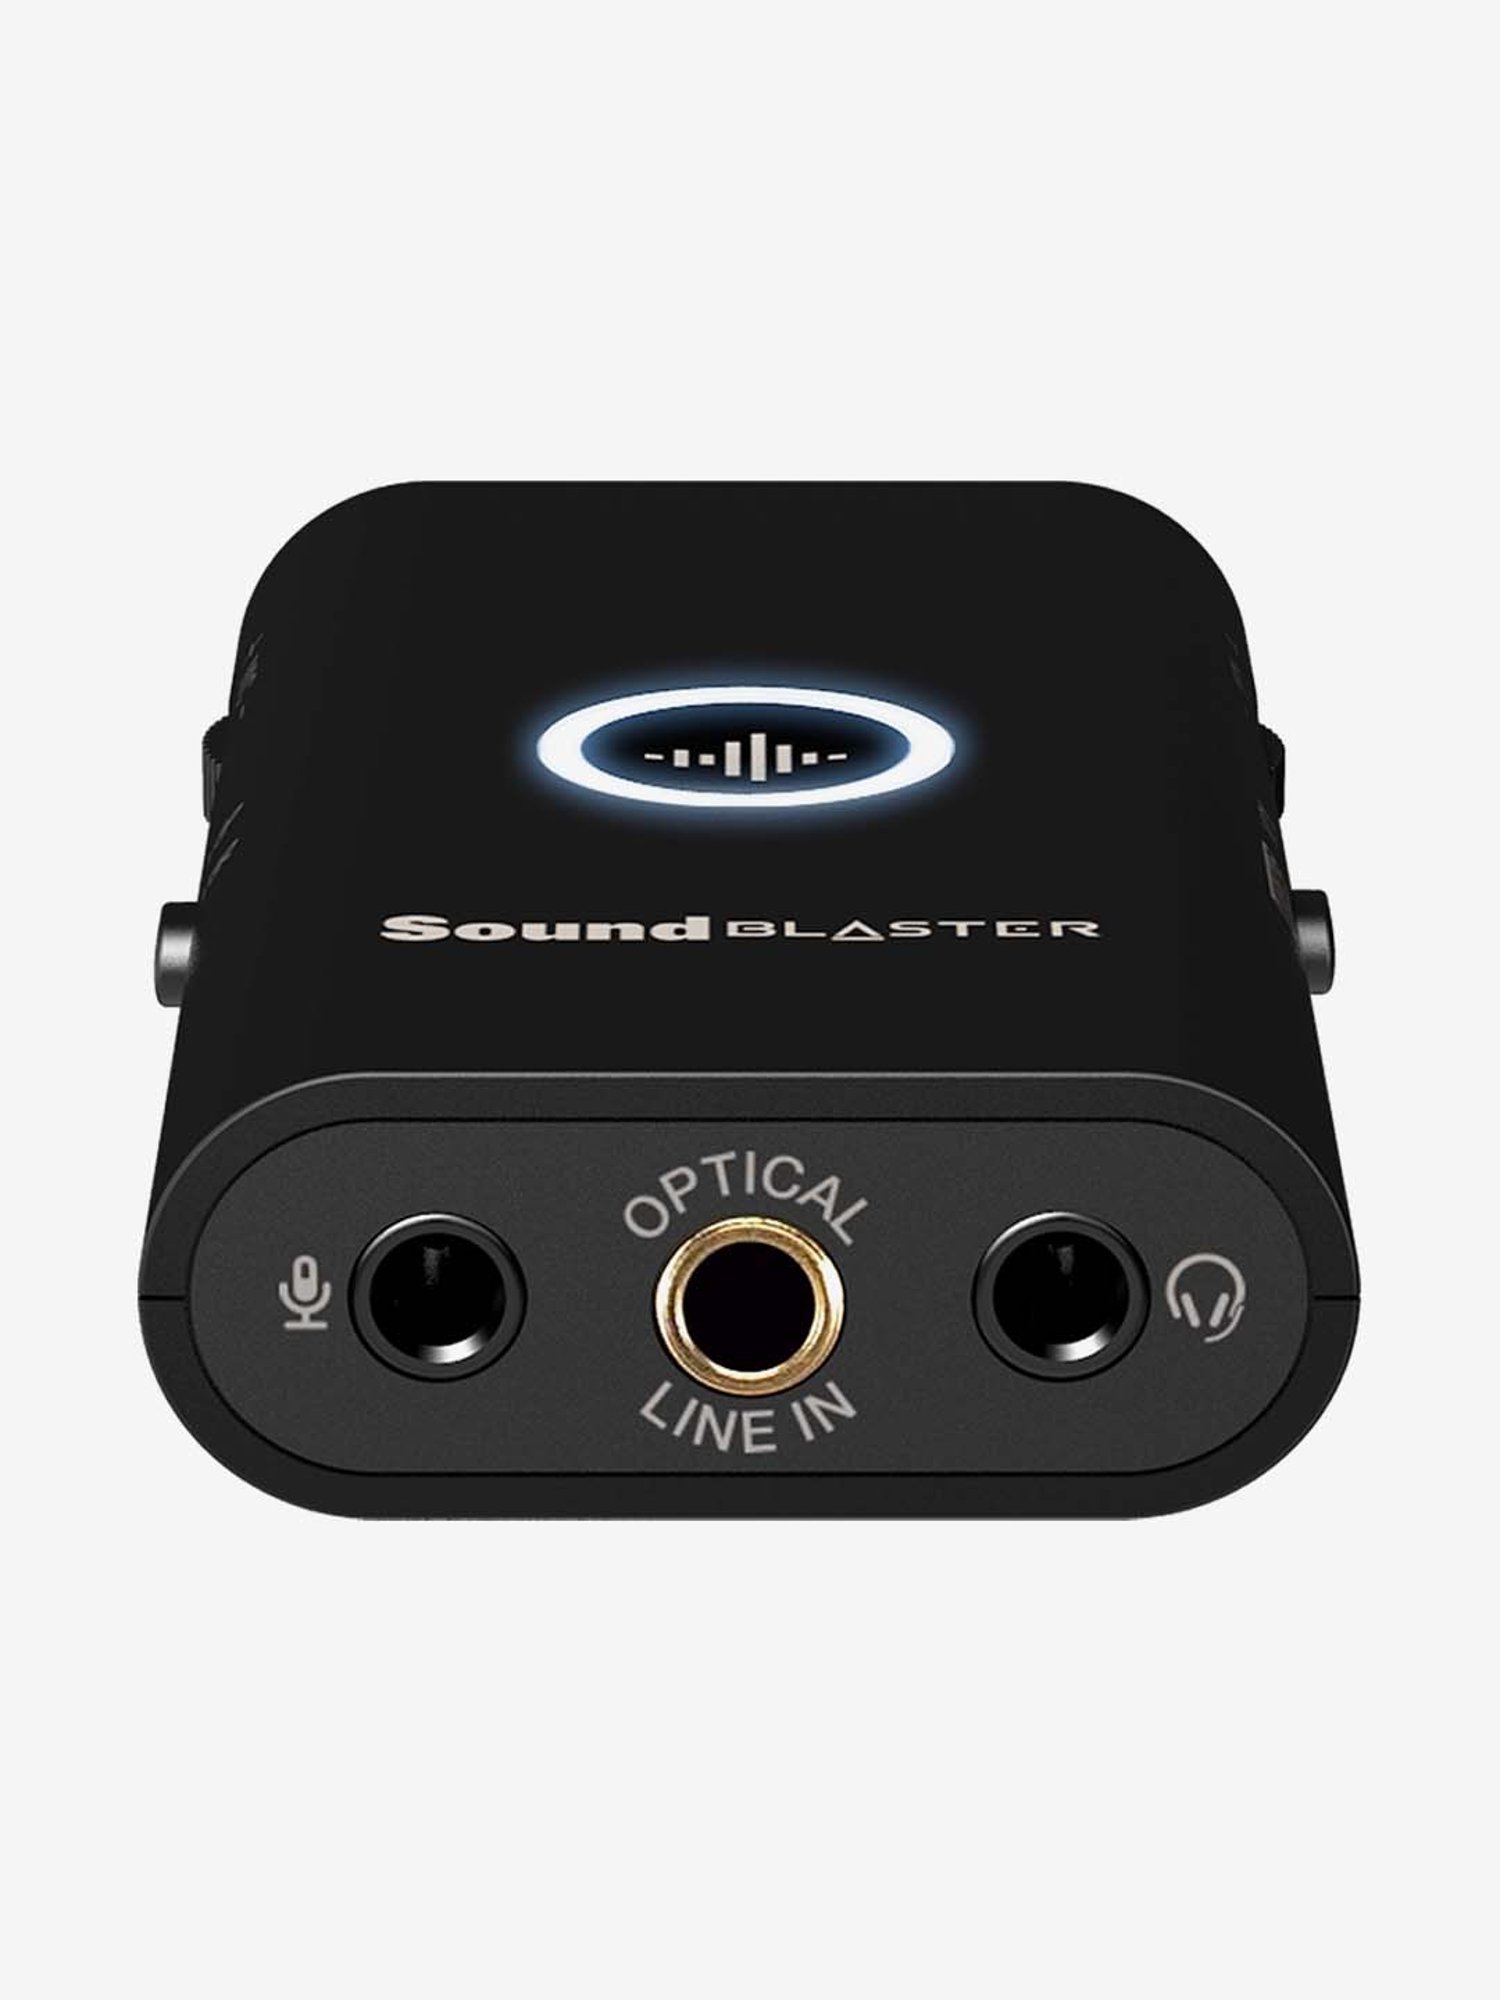 Buy Creative Sound Blaster G3 Portable External Console Gaming Usb C Dac Amp Black Online At Best Prices Tata Cliq